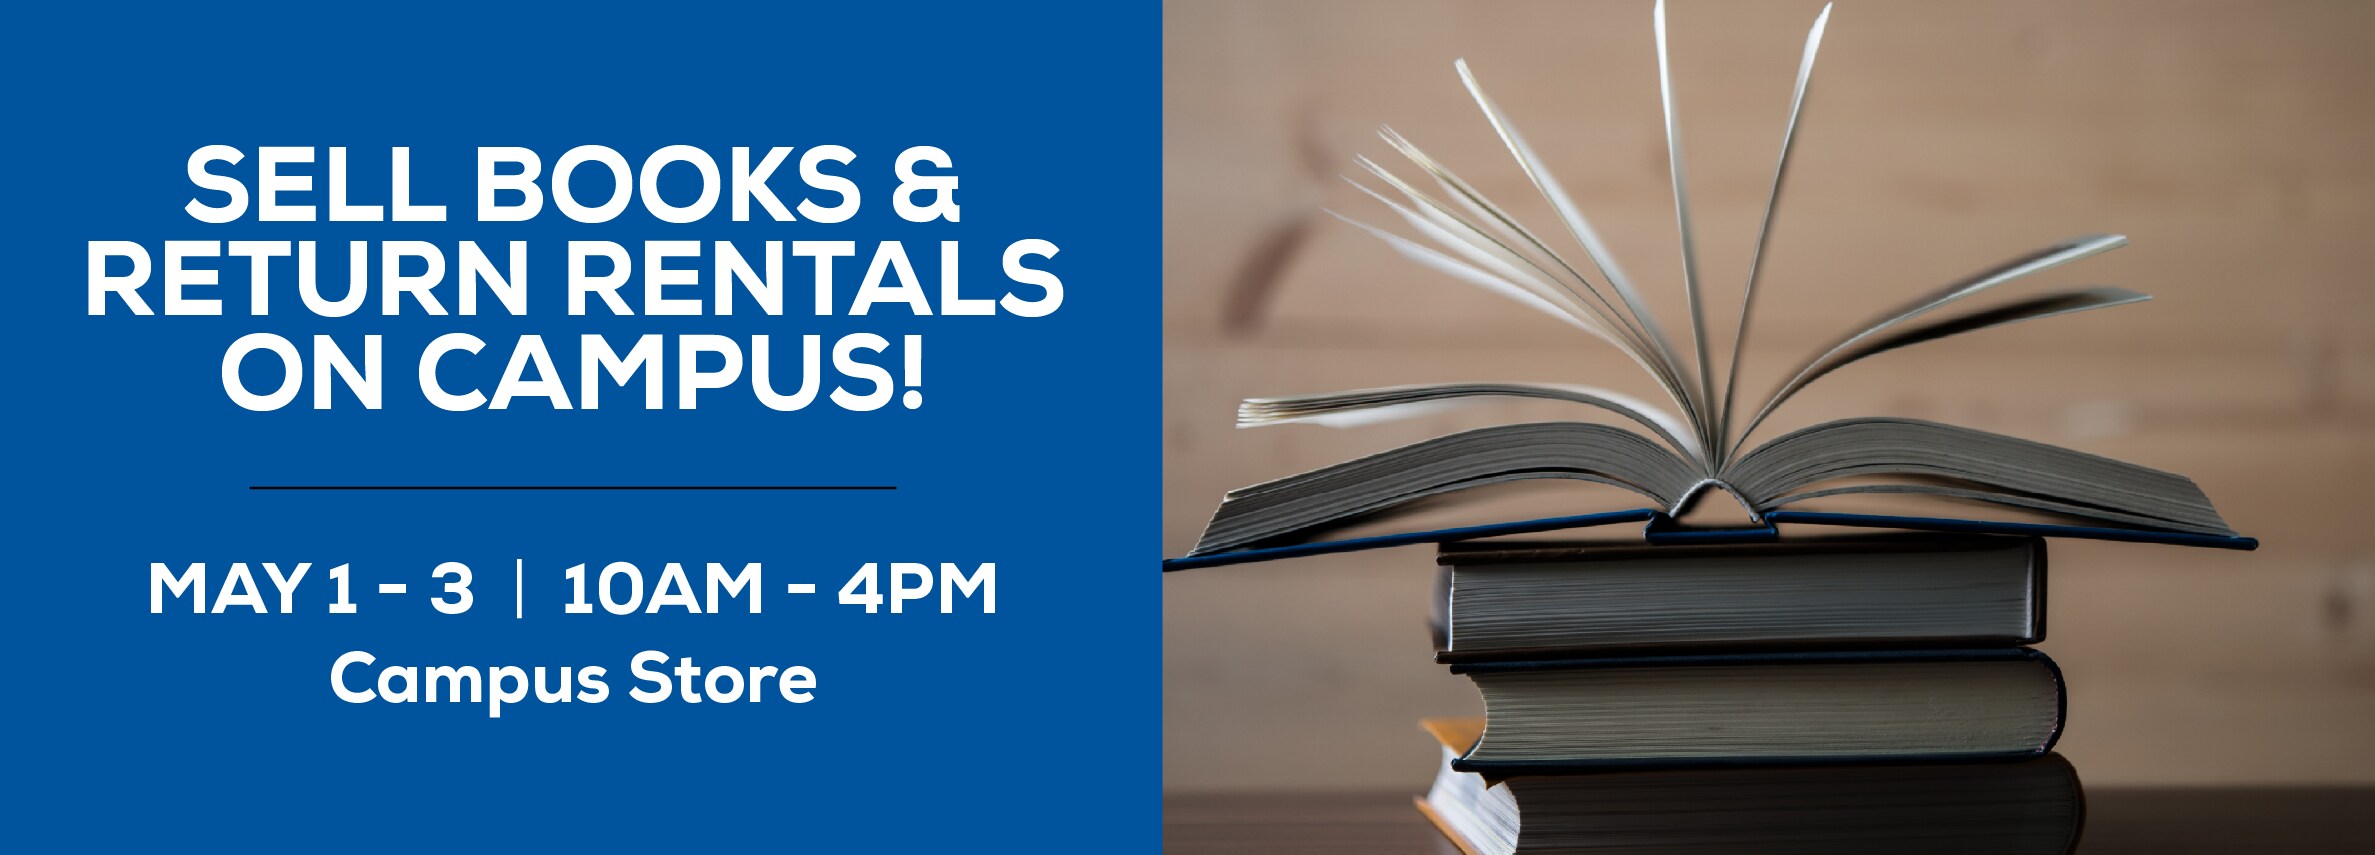 Sell Books & Return Rentals On Campus! May 1 - 3 from 10AM to 4PM. Located at Campus Store.